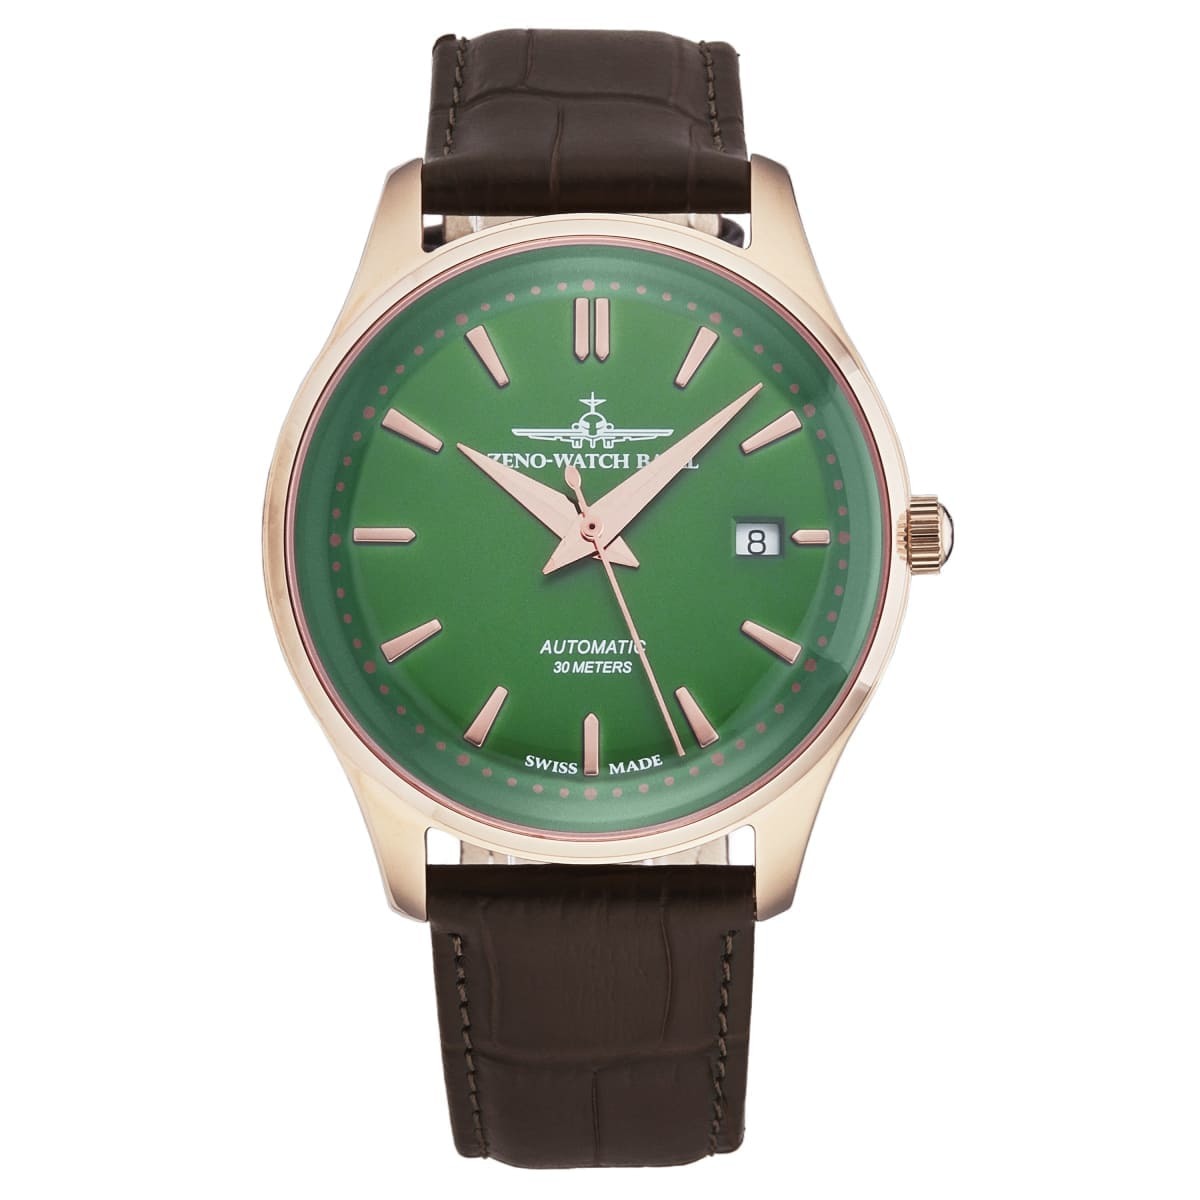 The Zeno men's 'Jules Classic' Limited Edition Green Dial Brown Leather Strap Automatic Watch 4942-2824-PGRG8 features a green dial complemented by a brown leather strap.